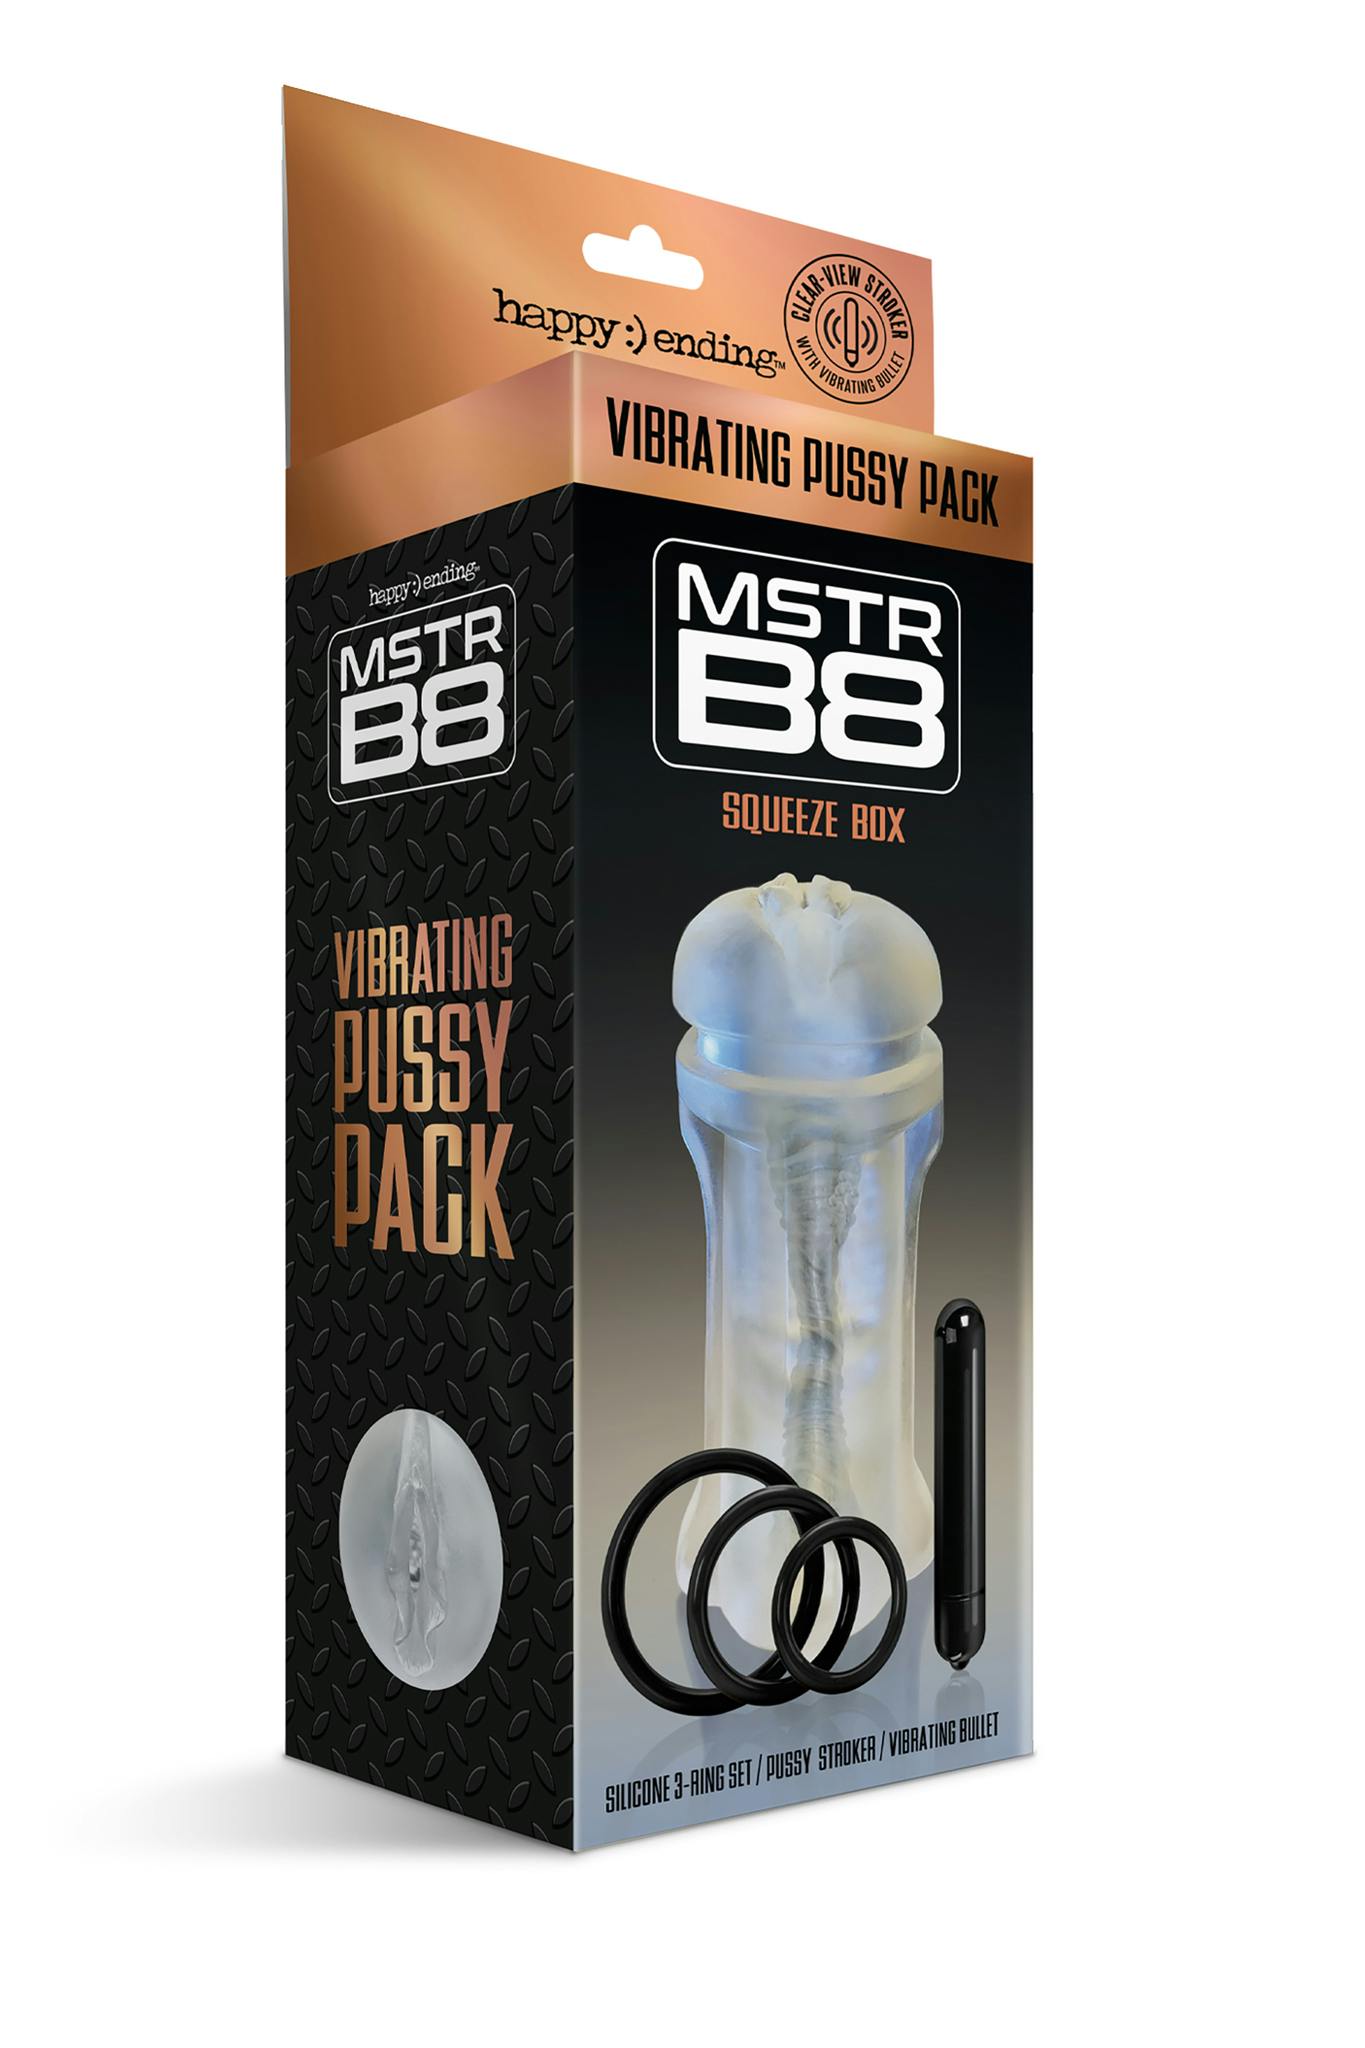 Happy ending, MSTRB8 Vibrating Stroker Pussy pack "Squeeze Box"